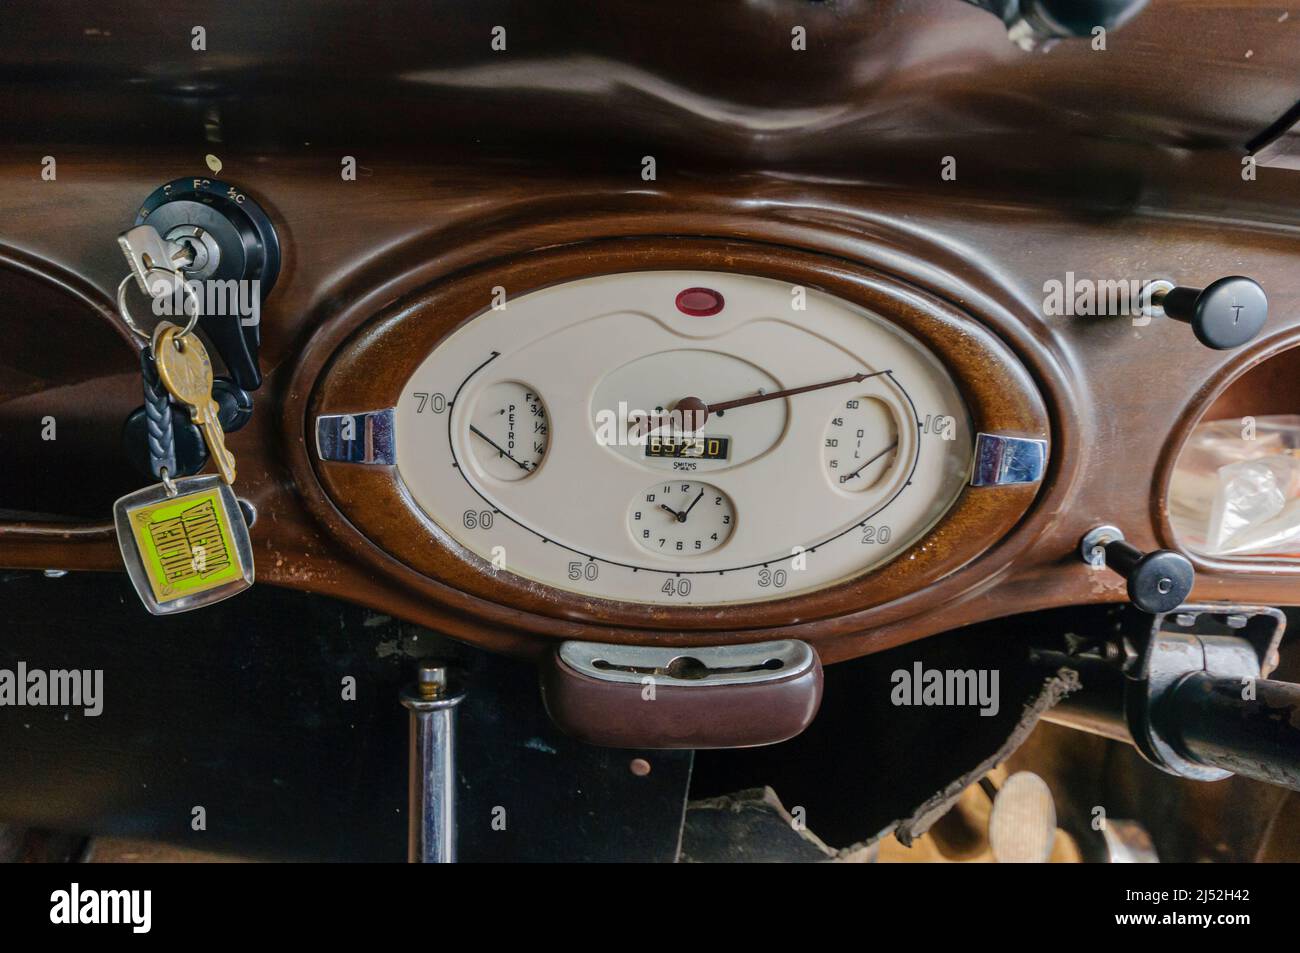 Dashboard including speedometer, odometer, oil pressure and temperature gauges in the interior of a 1938 Hillman Minx Stock Photo